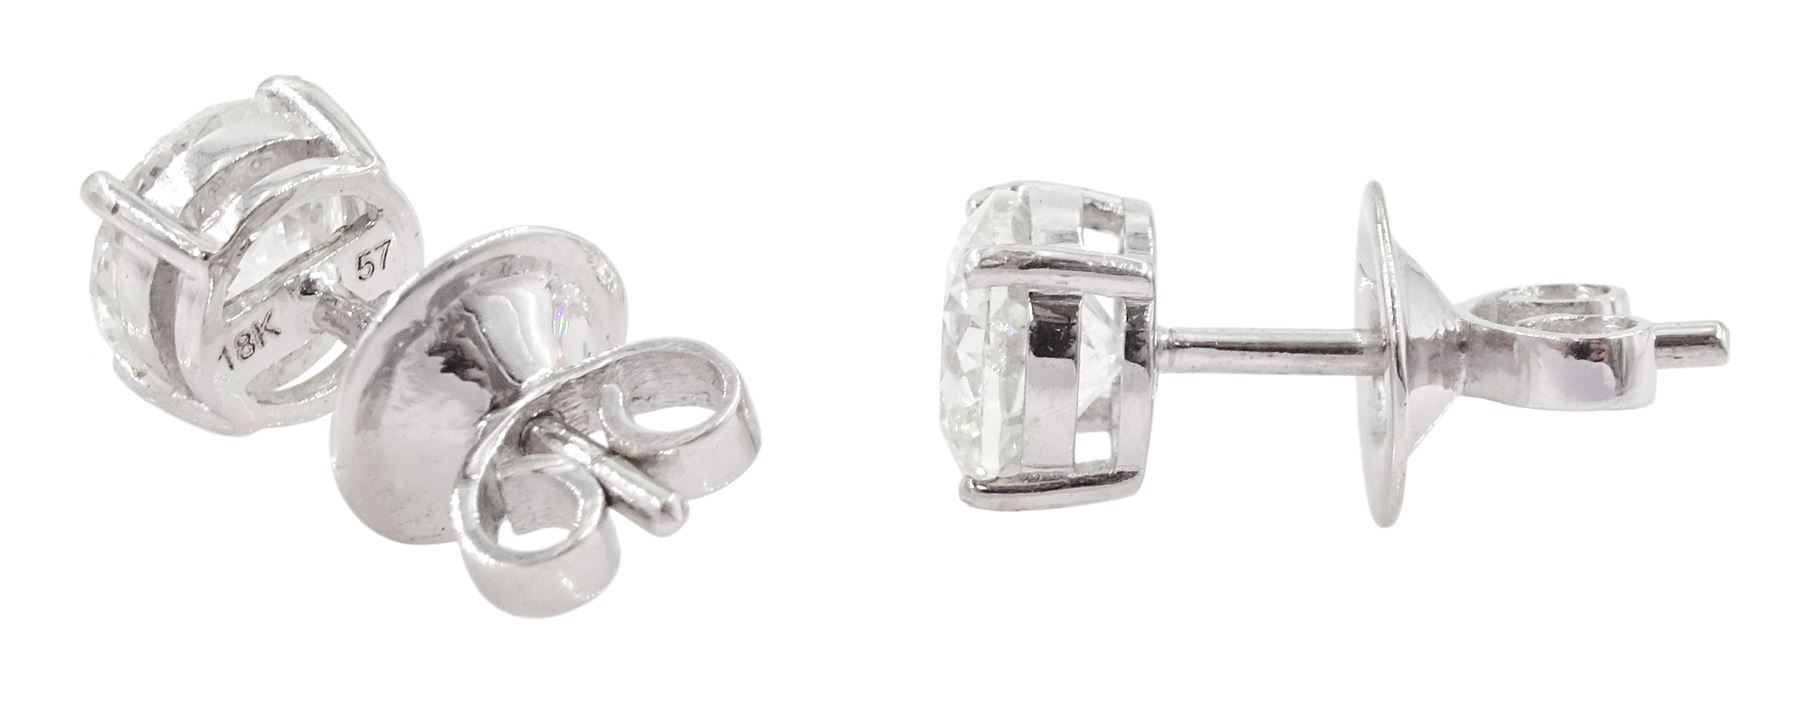 Pair of 18ct white gold round brilliant cut diamond stud earrings - Image 2 of 2